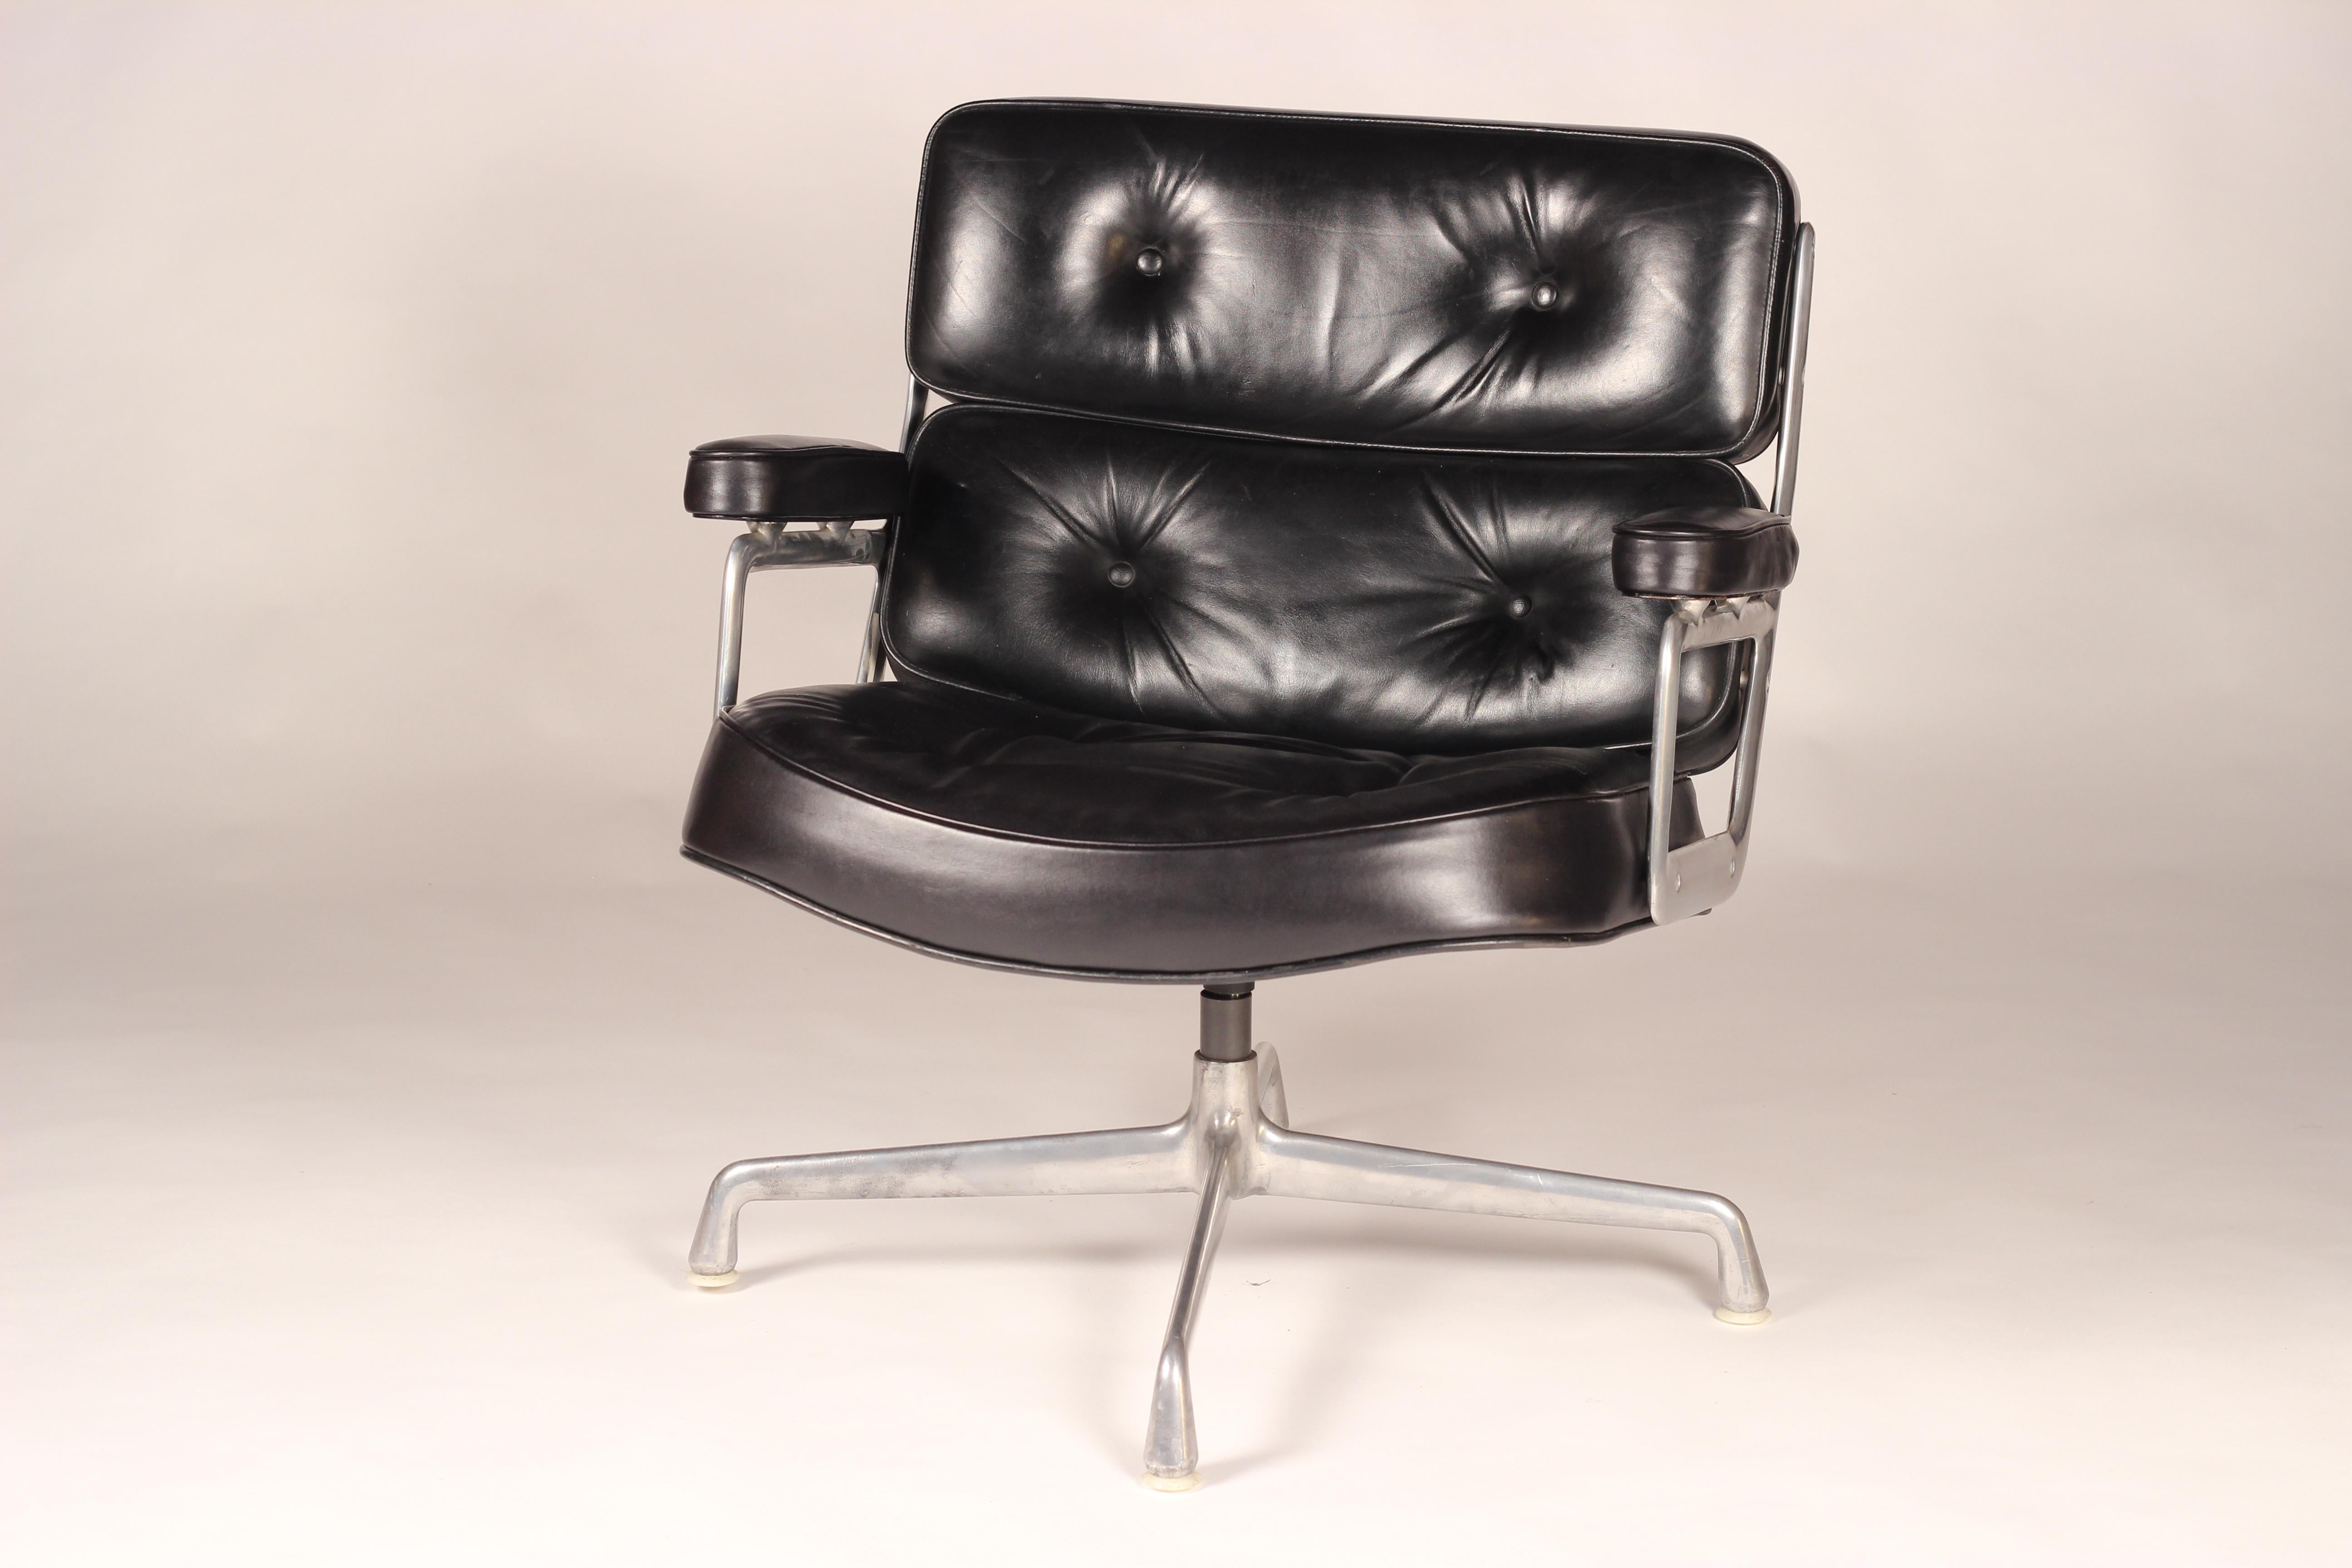 Designed in 1960 for the reception areas of the Time-Life building in New York by Charles & Ray Eames. The Time Life Lobby Chair combines the characteristics of some of the other iconic designs they developed around the same period. The wide seat,